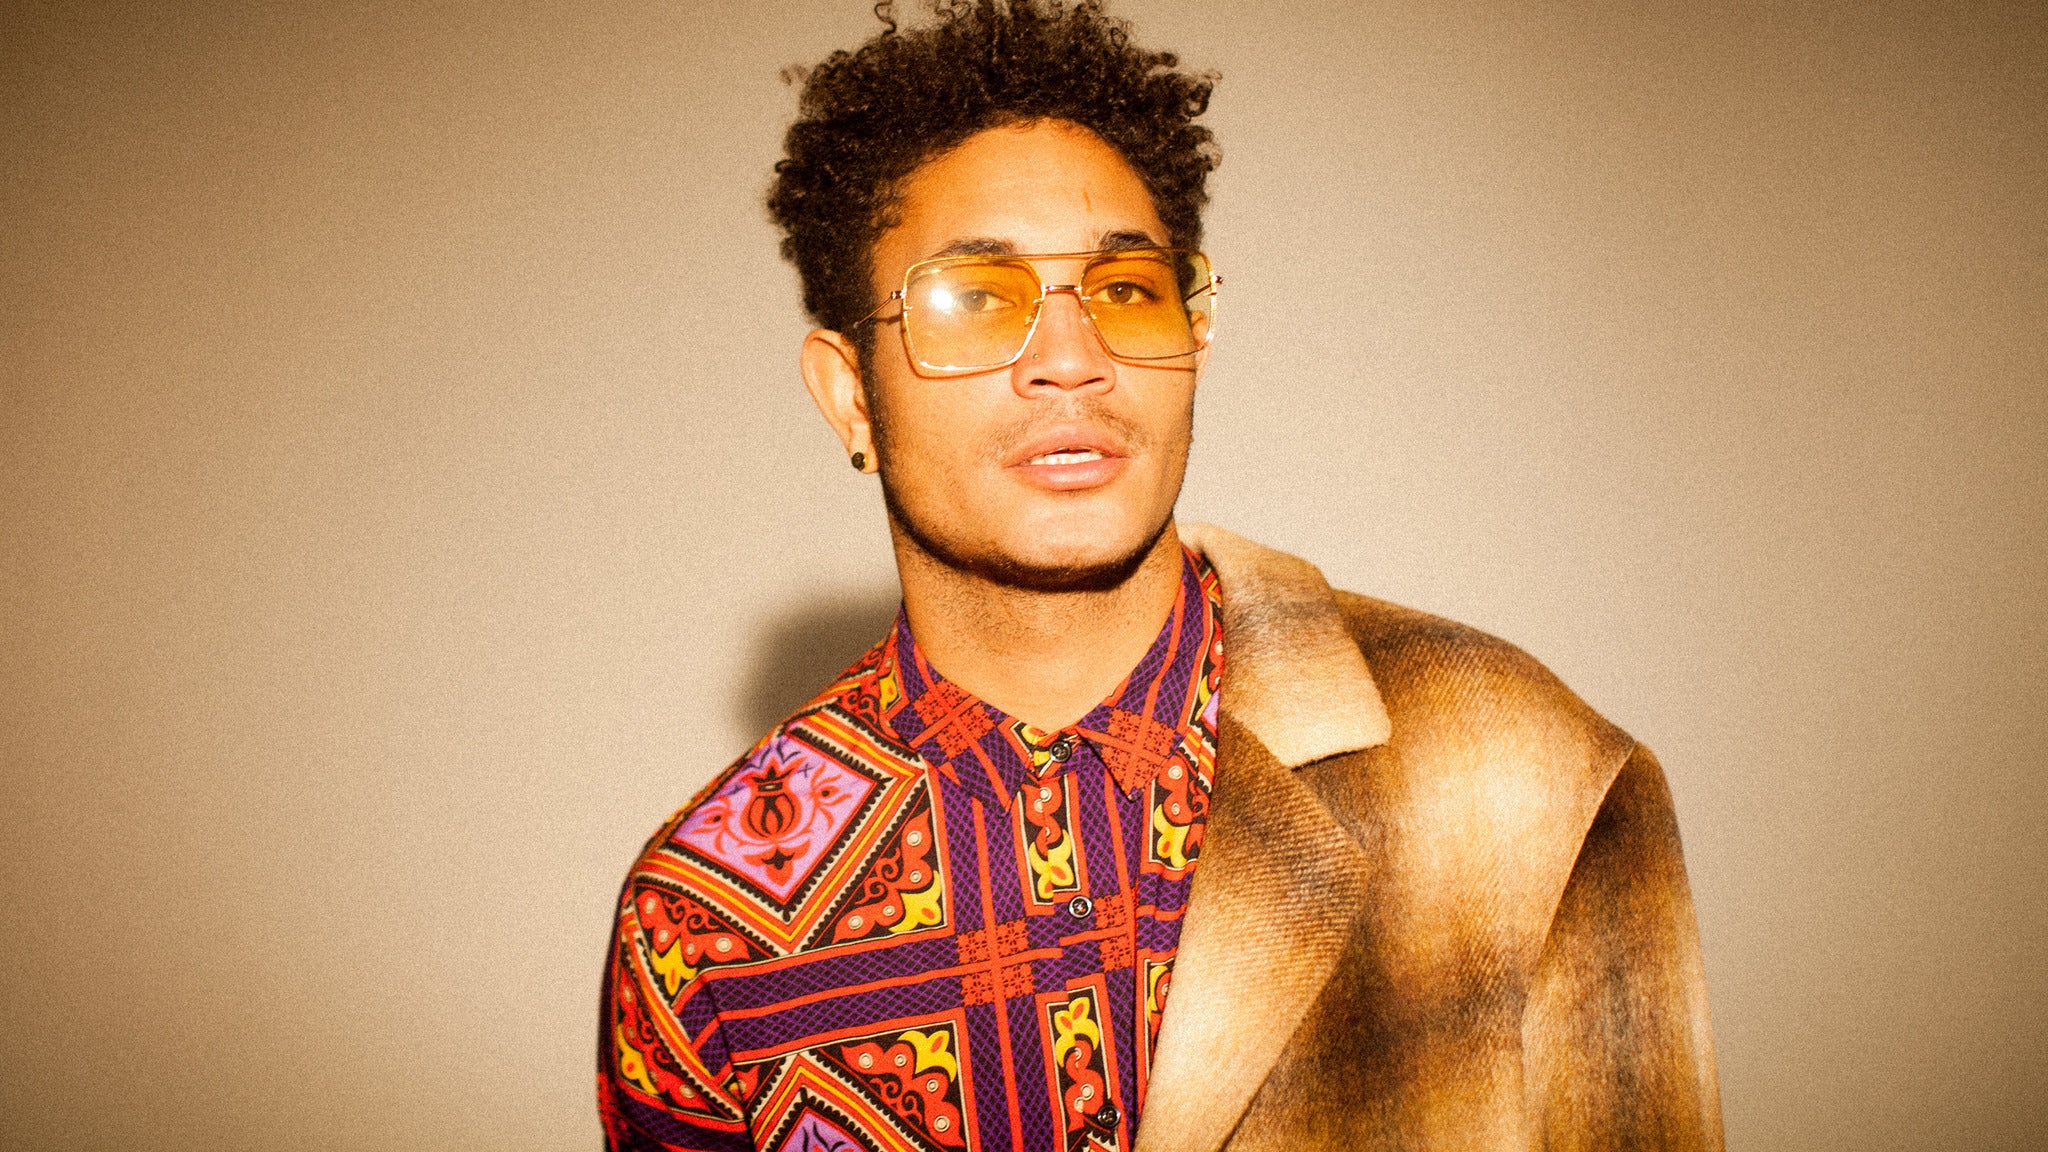 Bryce Vine in Calgary promo photo for Exclusive presale offer code